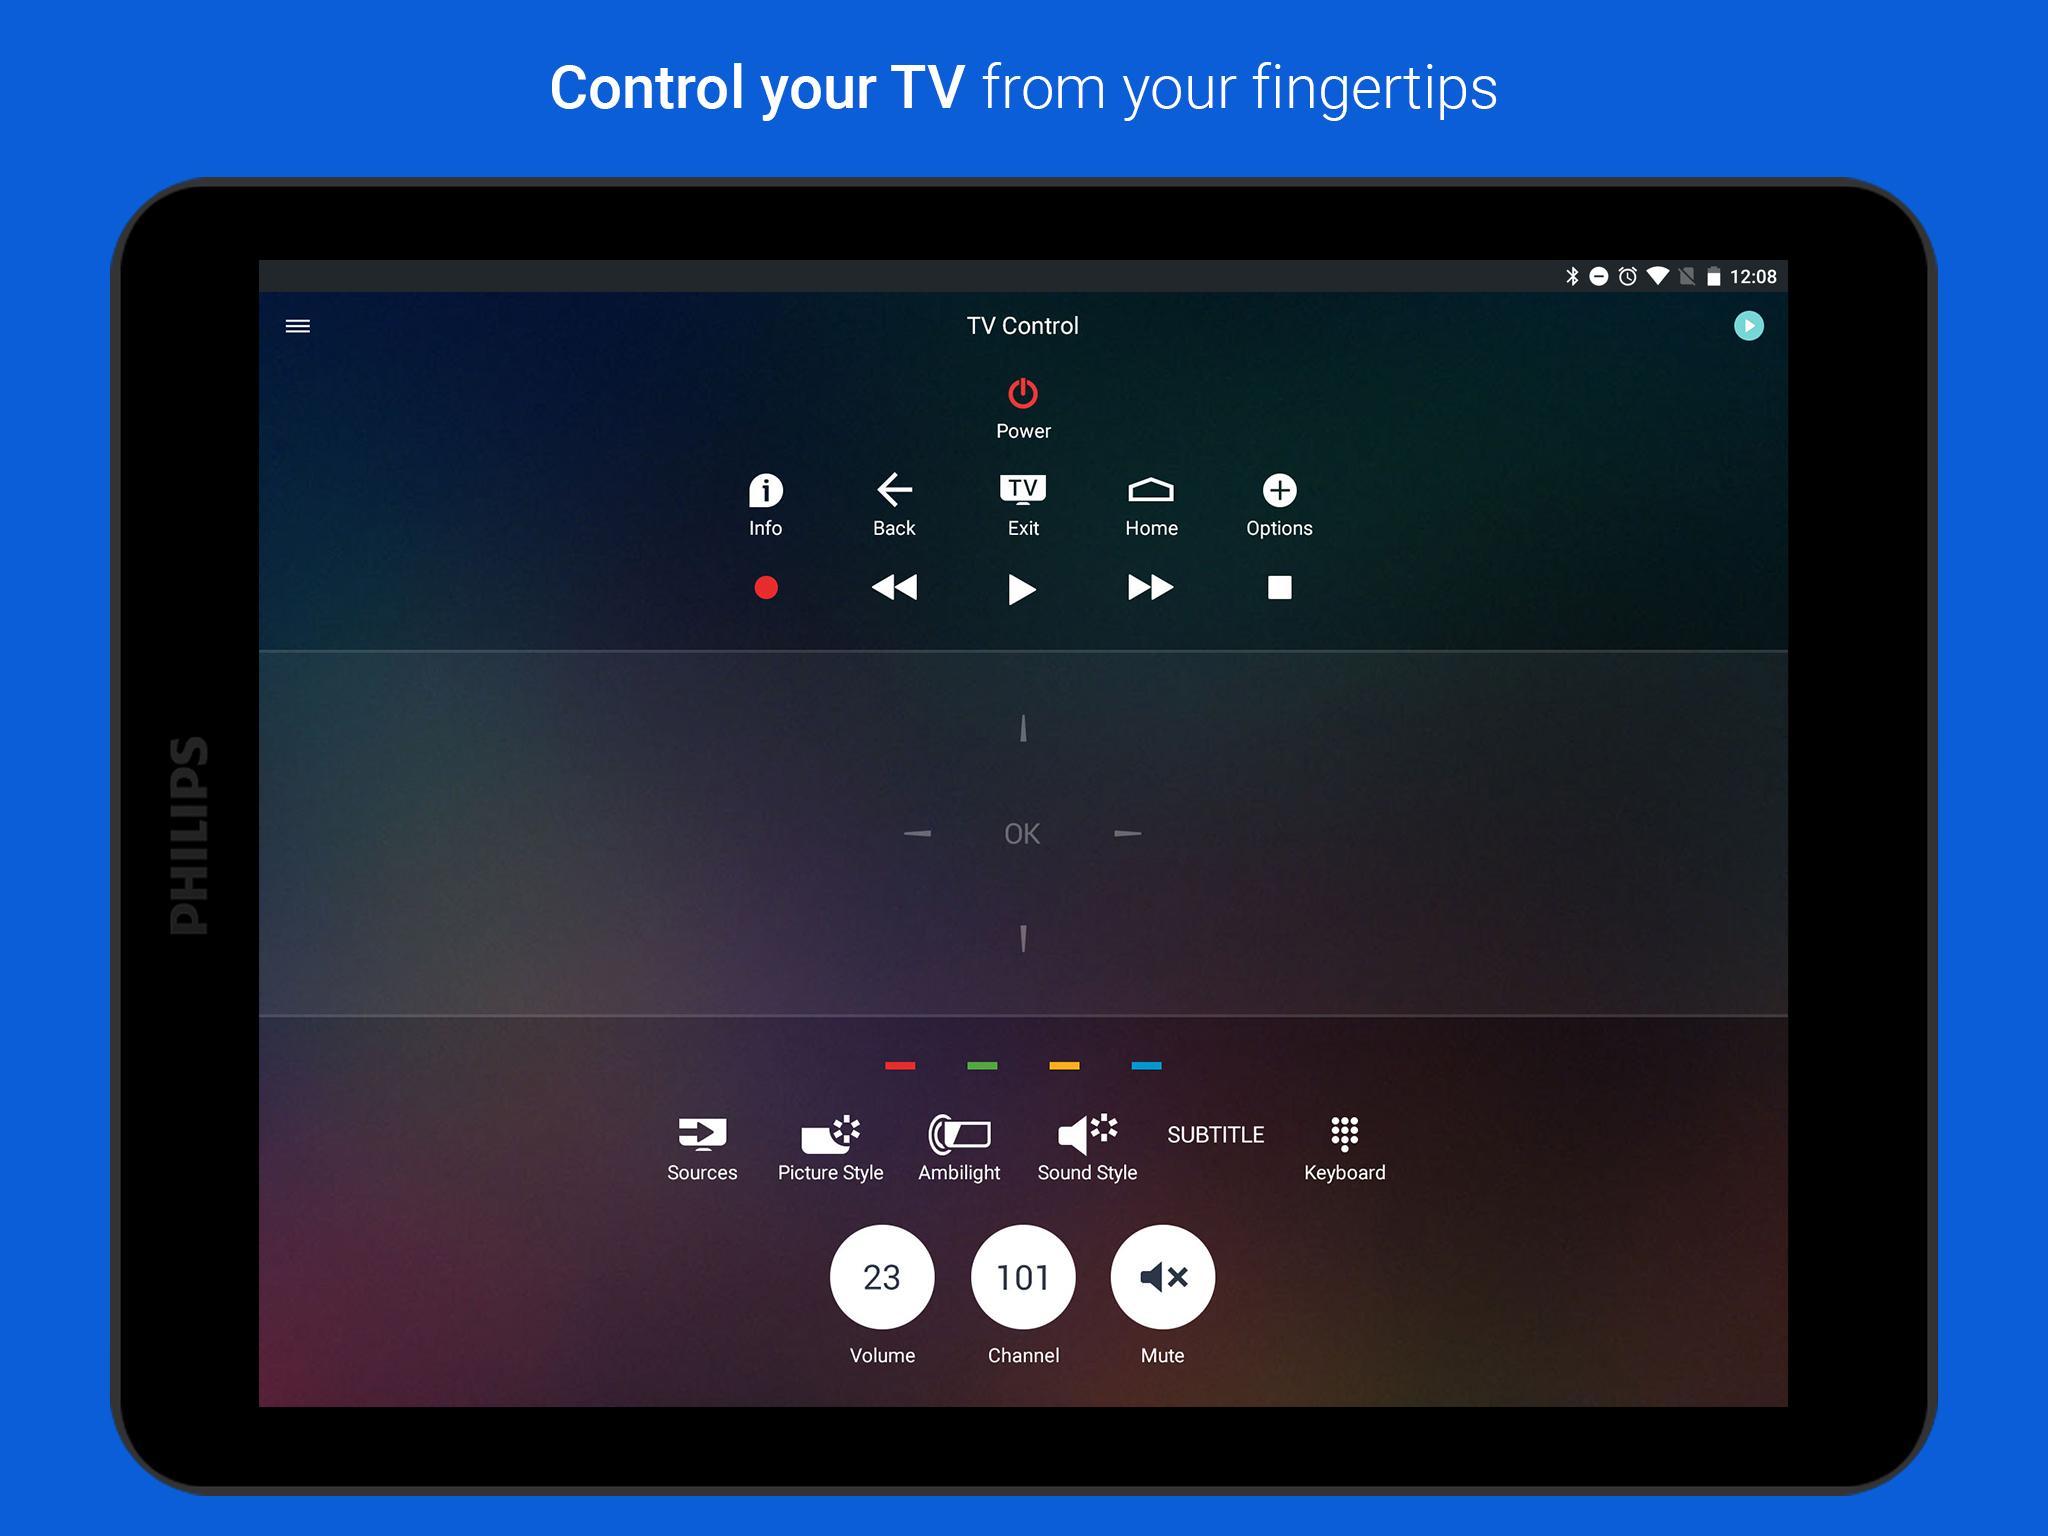 Philips TV Remote for Android - APK Download